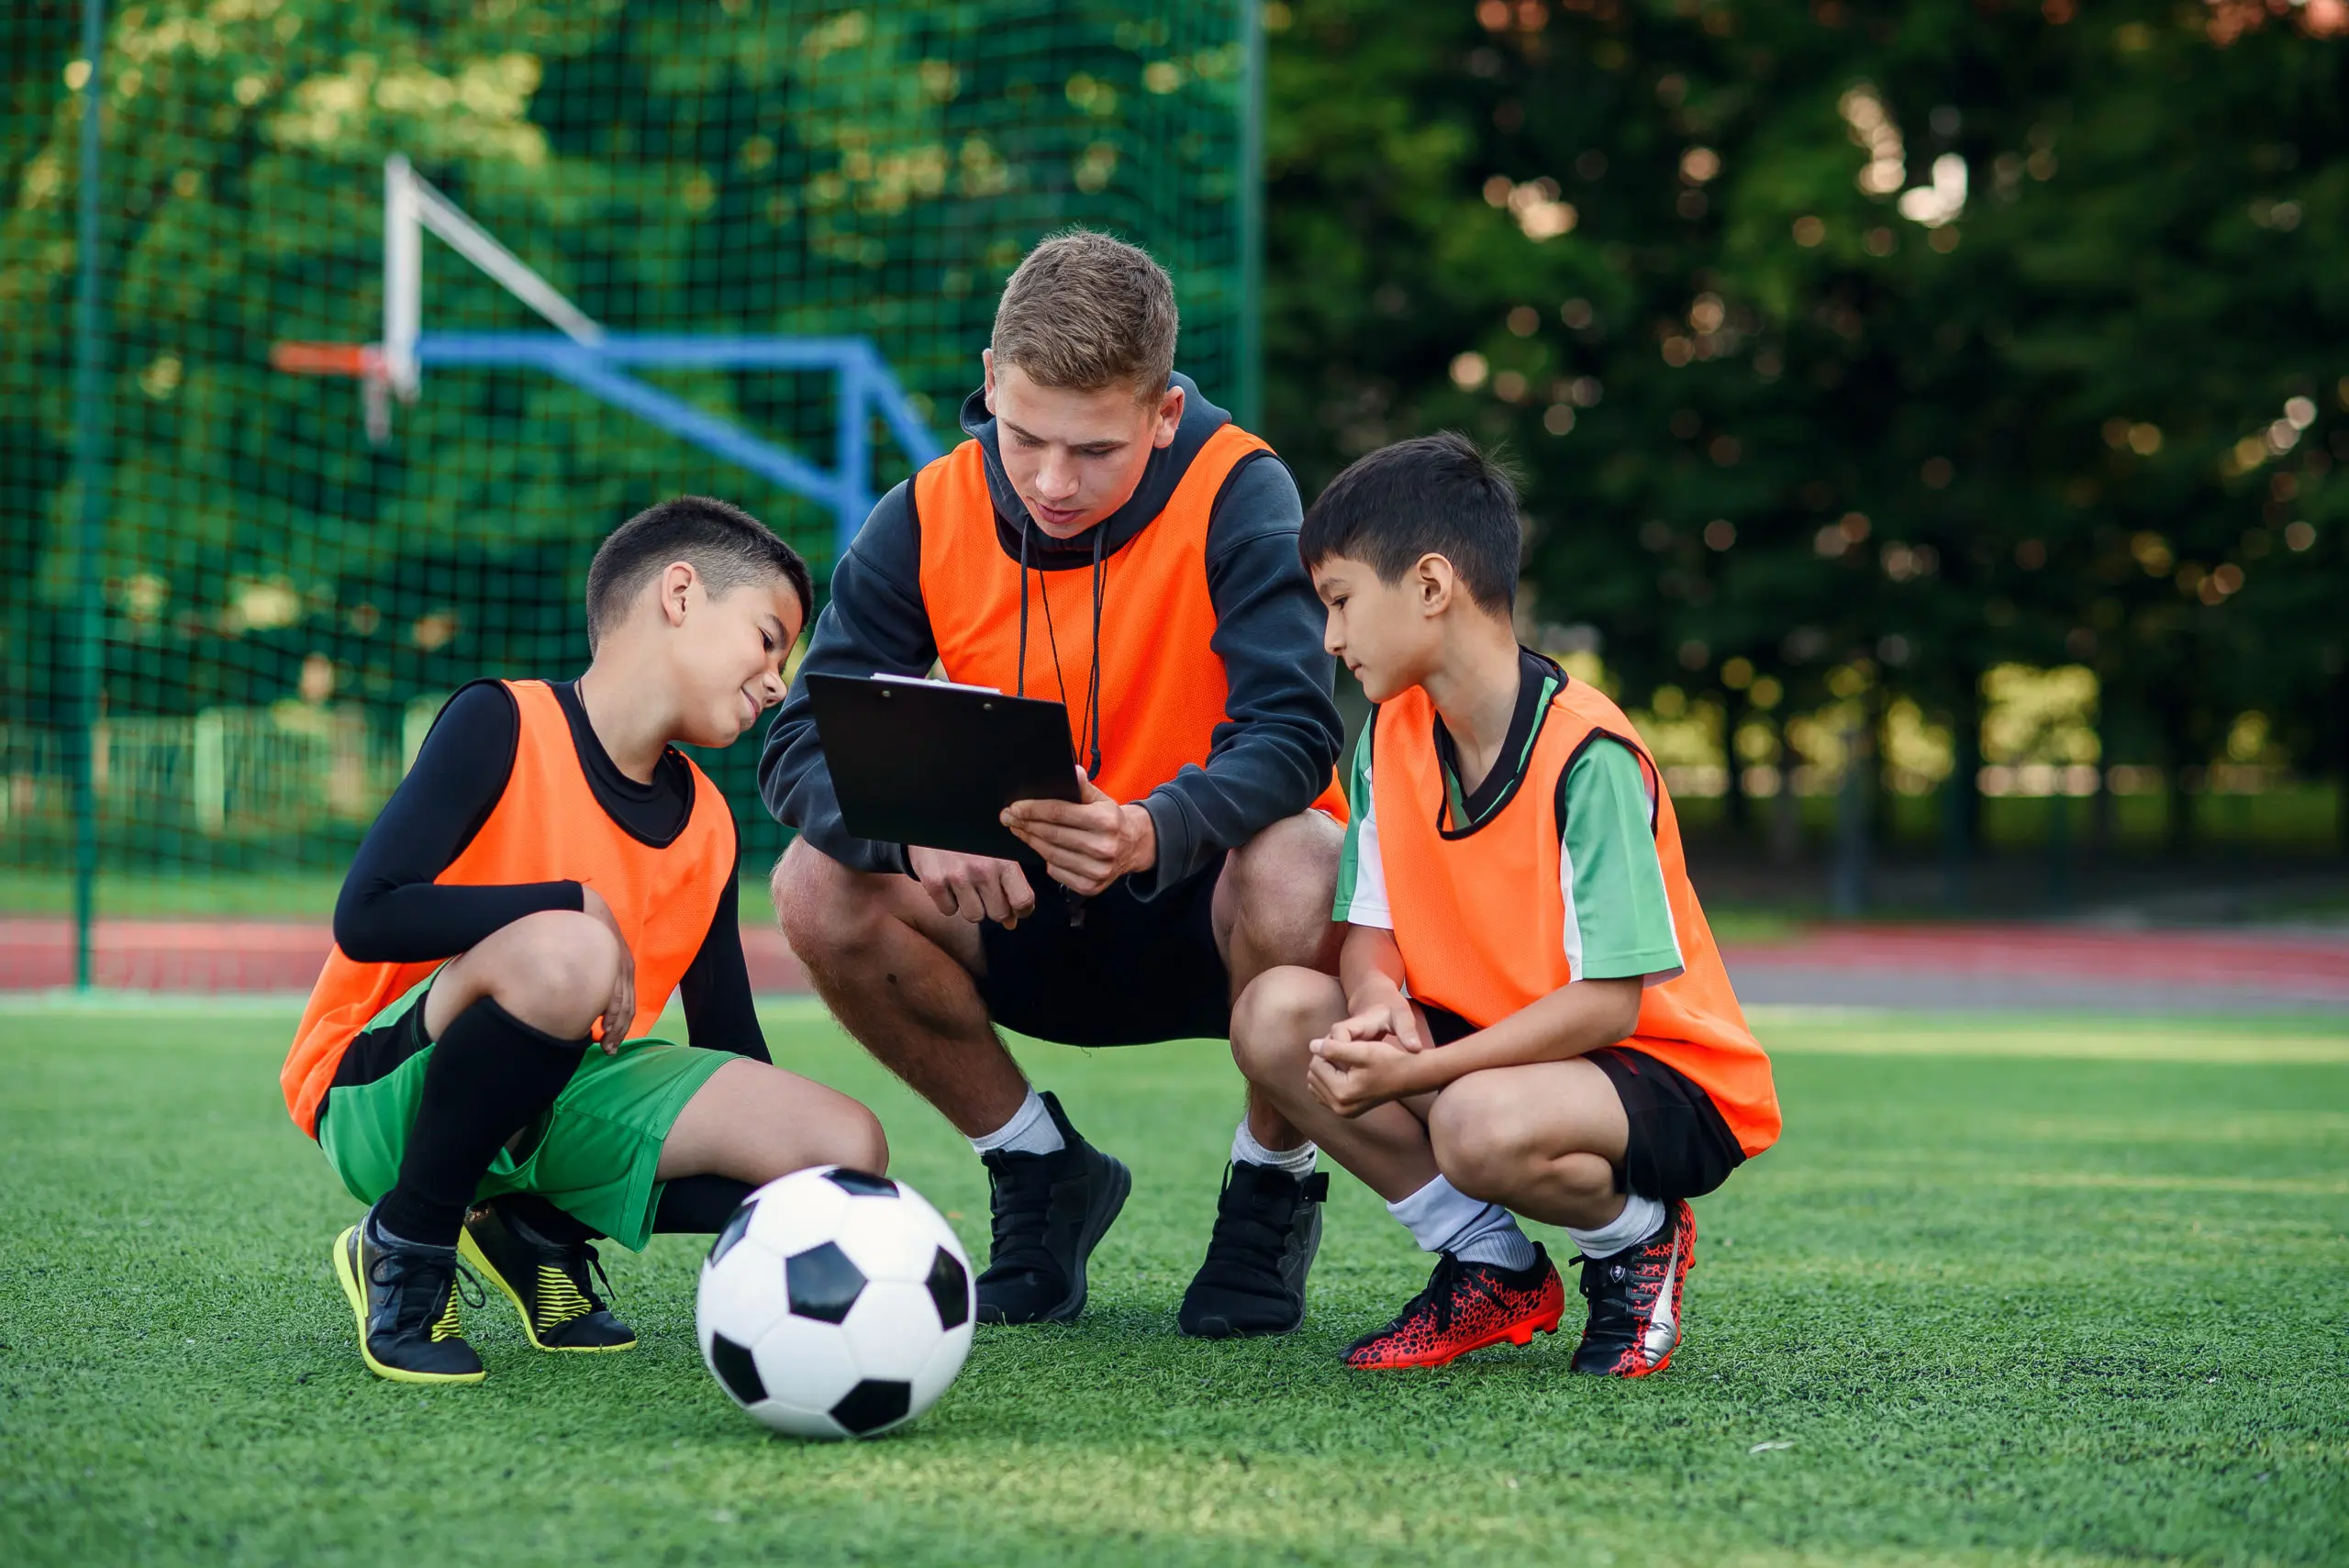 Featured image: 5 Tips For First-Time Soccer Coaches